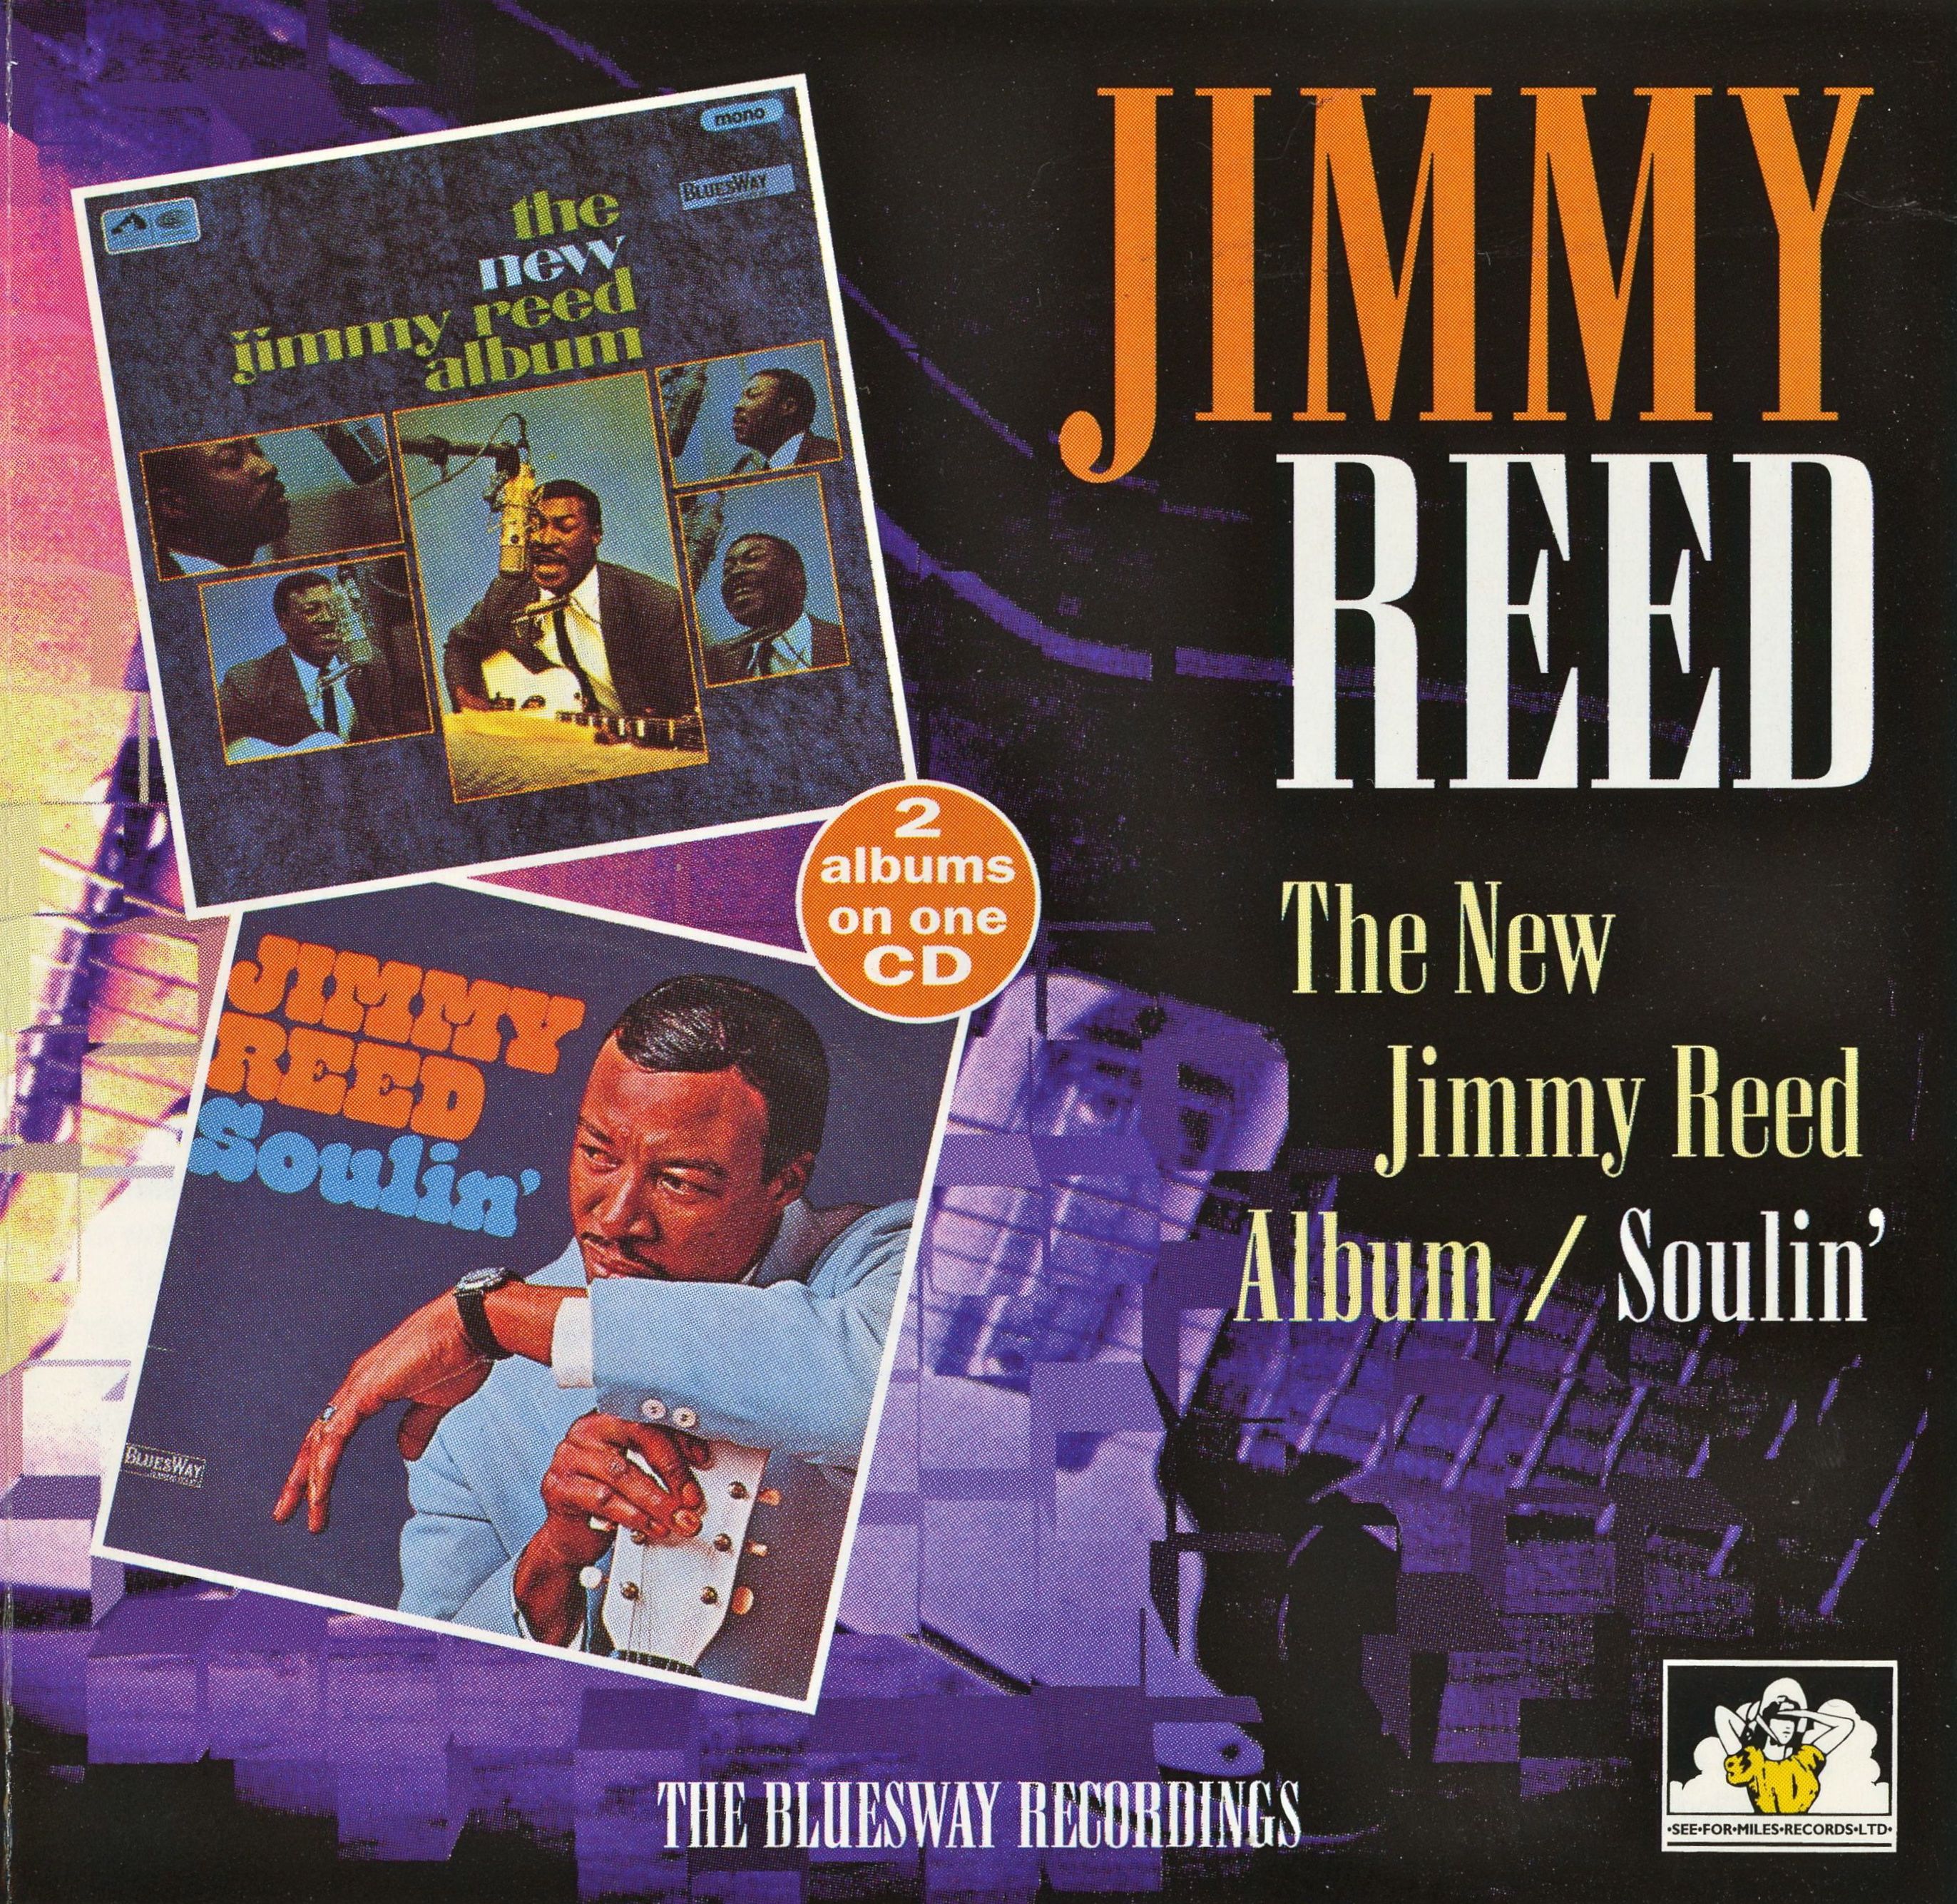 Jimmy Reed - The New Jimmy Reed Album + Soulin' 1967 1997